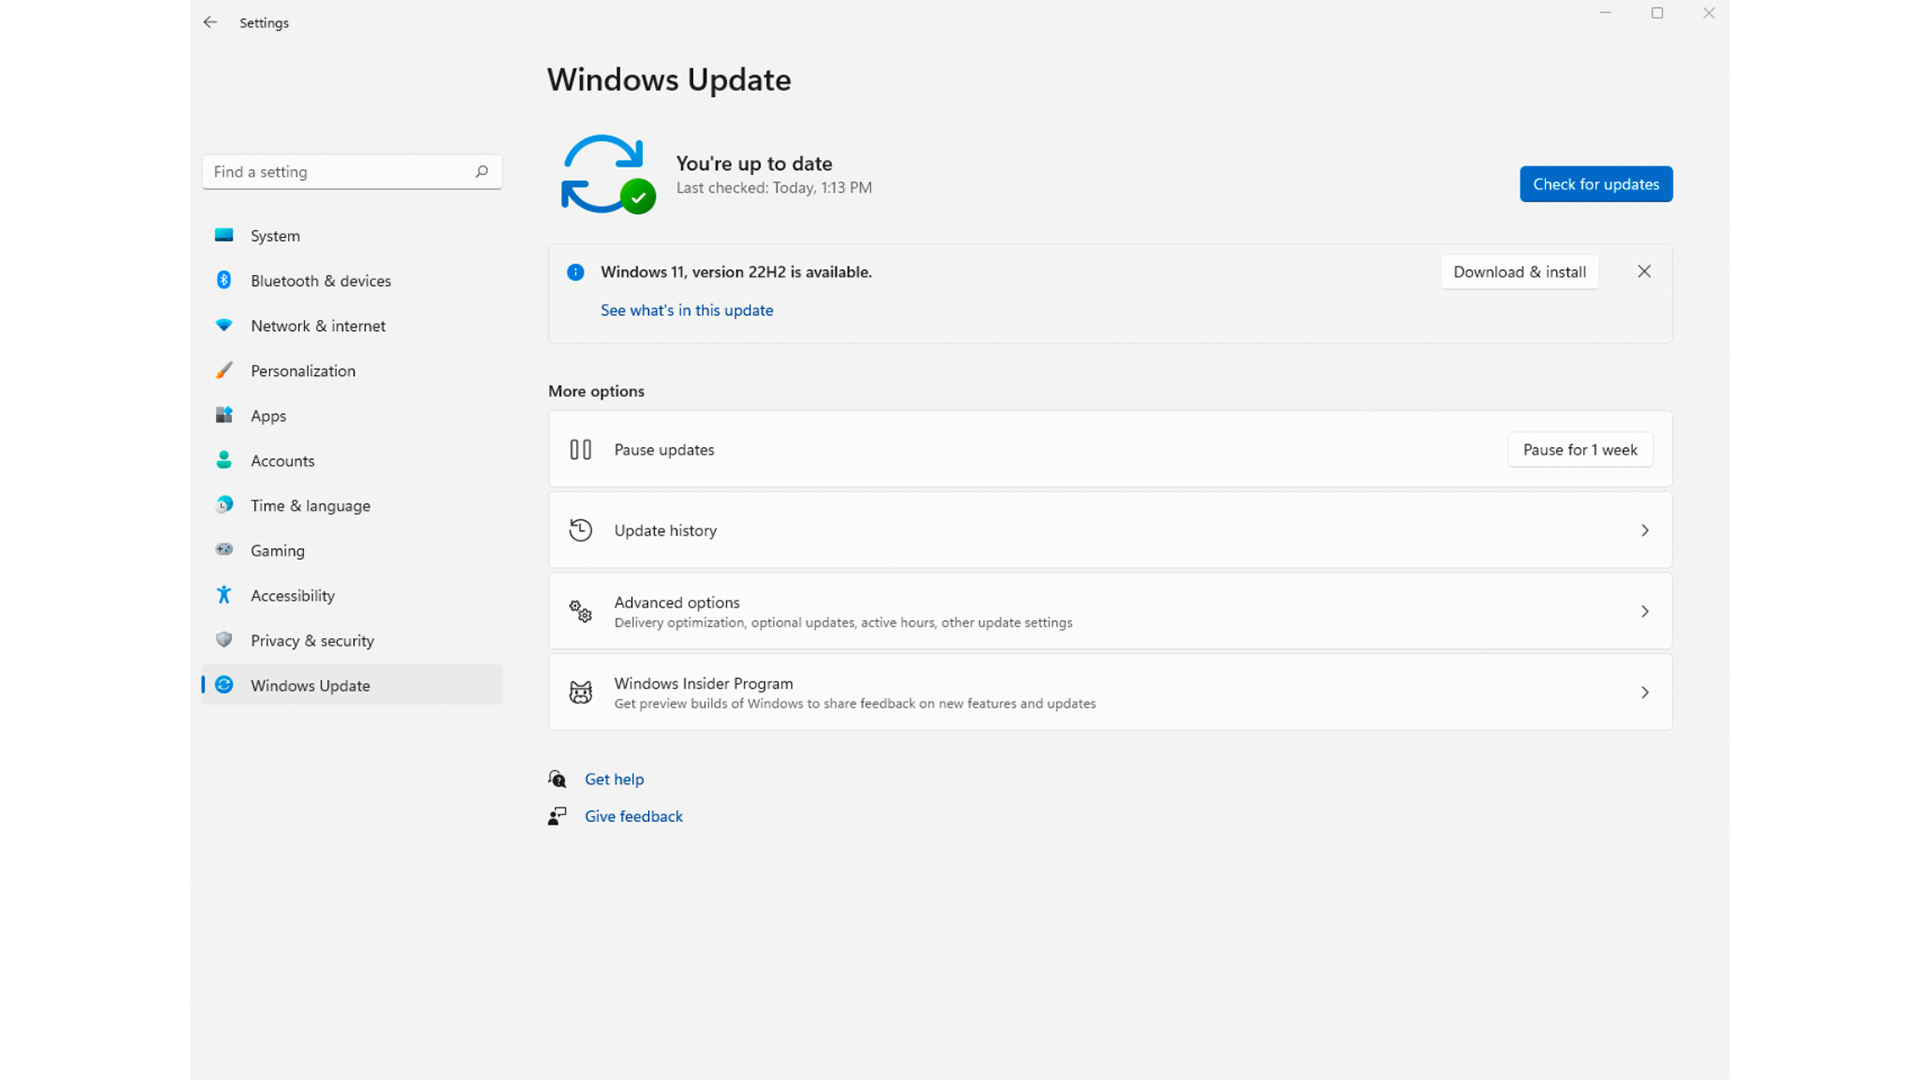 Available update for Windows 11 2022